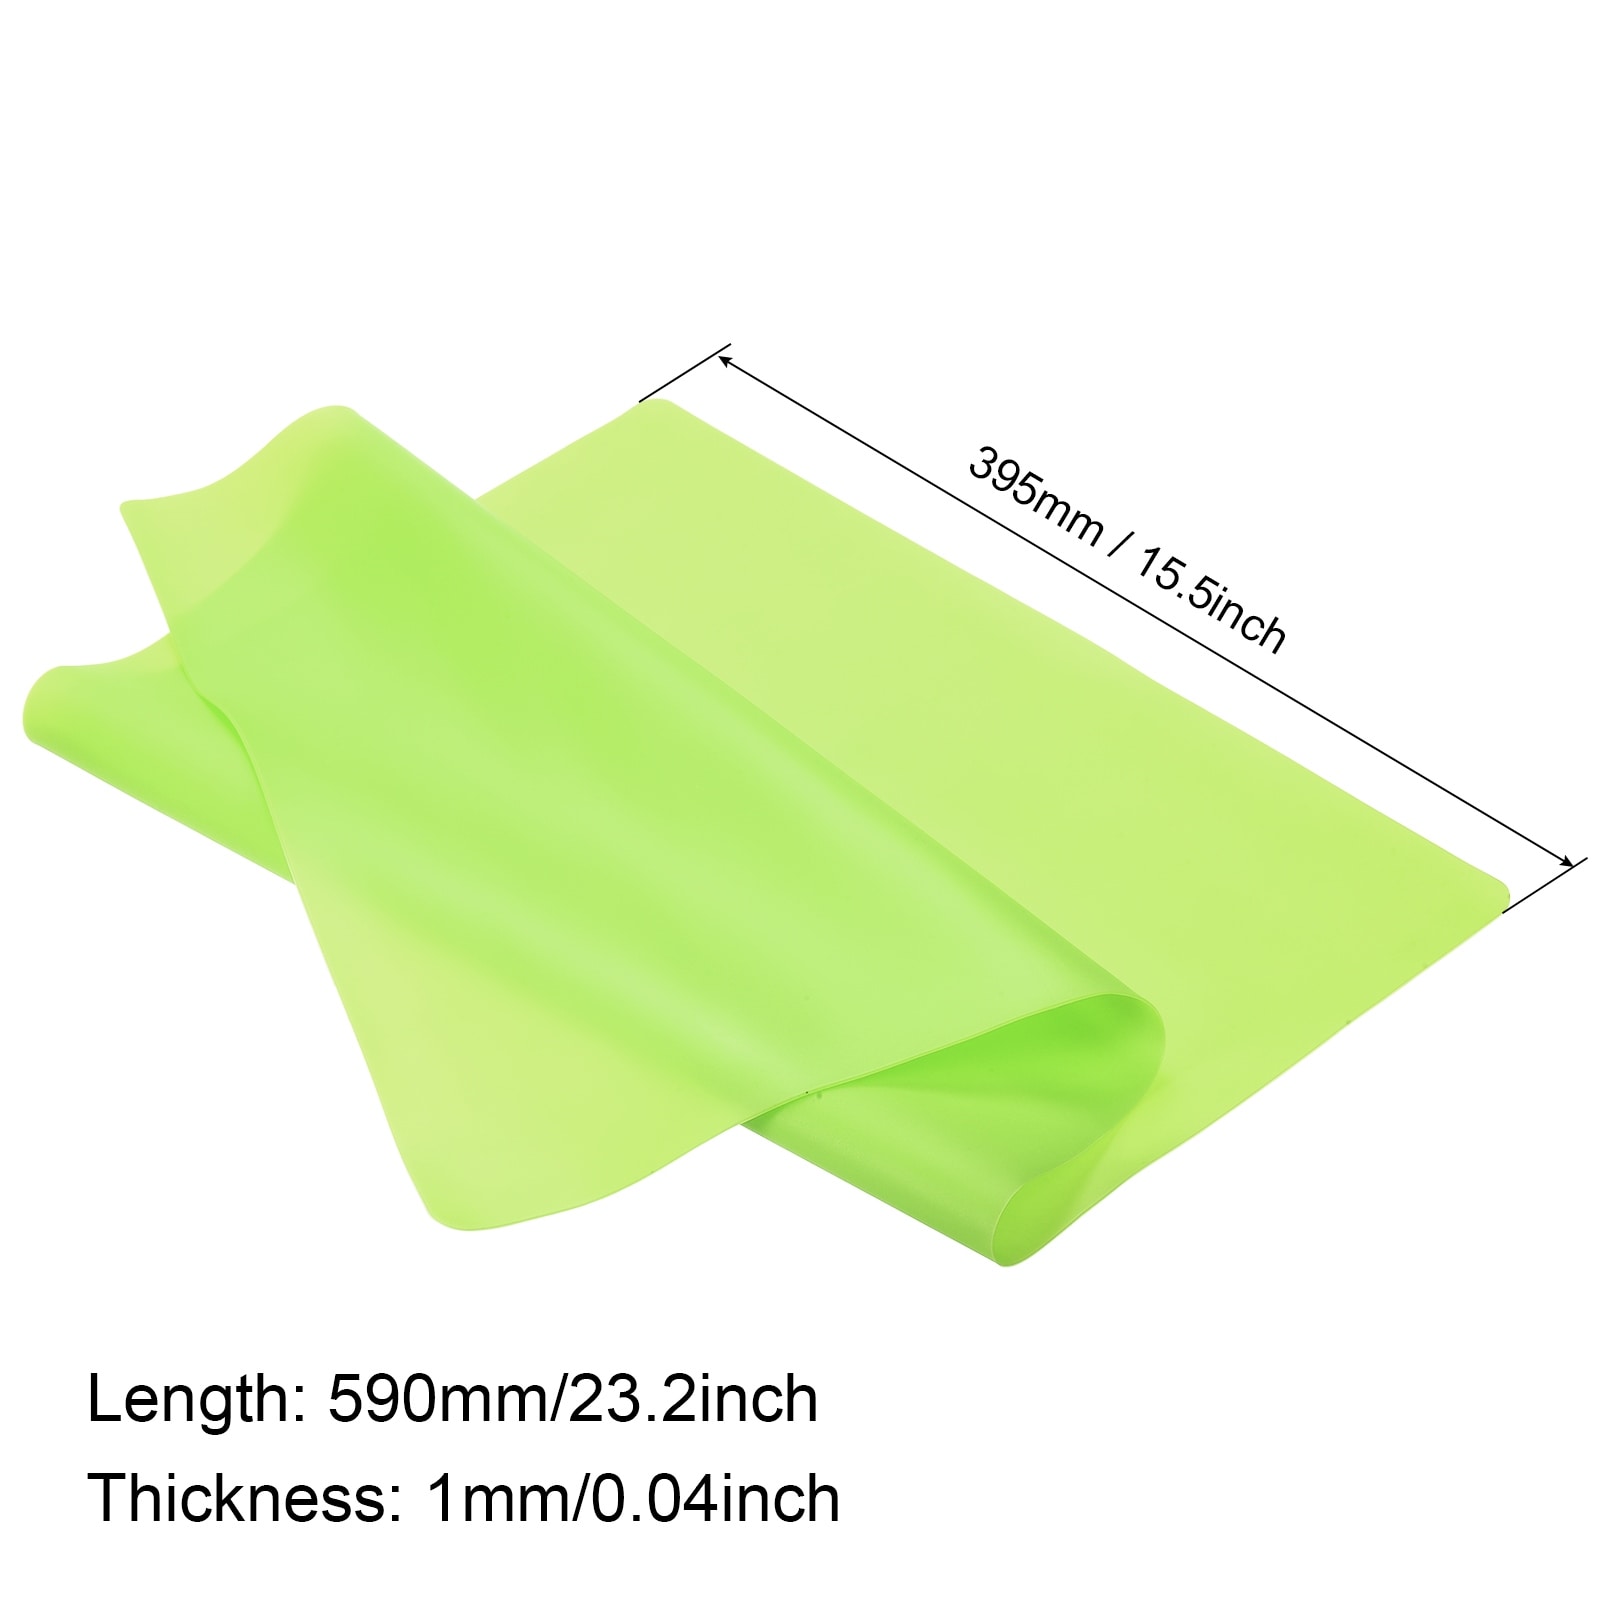 https://ak1.ostkcdn.com/images/products/is/images/direct/0296c57e17b32245678ac88fc151cec36a76e989/Silicone-Counter-Mat-Heat-Resistant-Mat%2C-for-Counter-Top%2C-Tableware.jpg